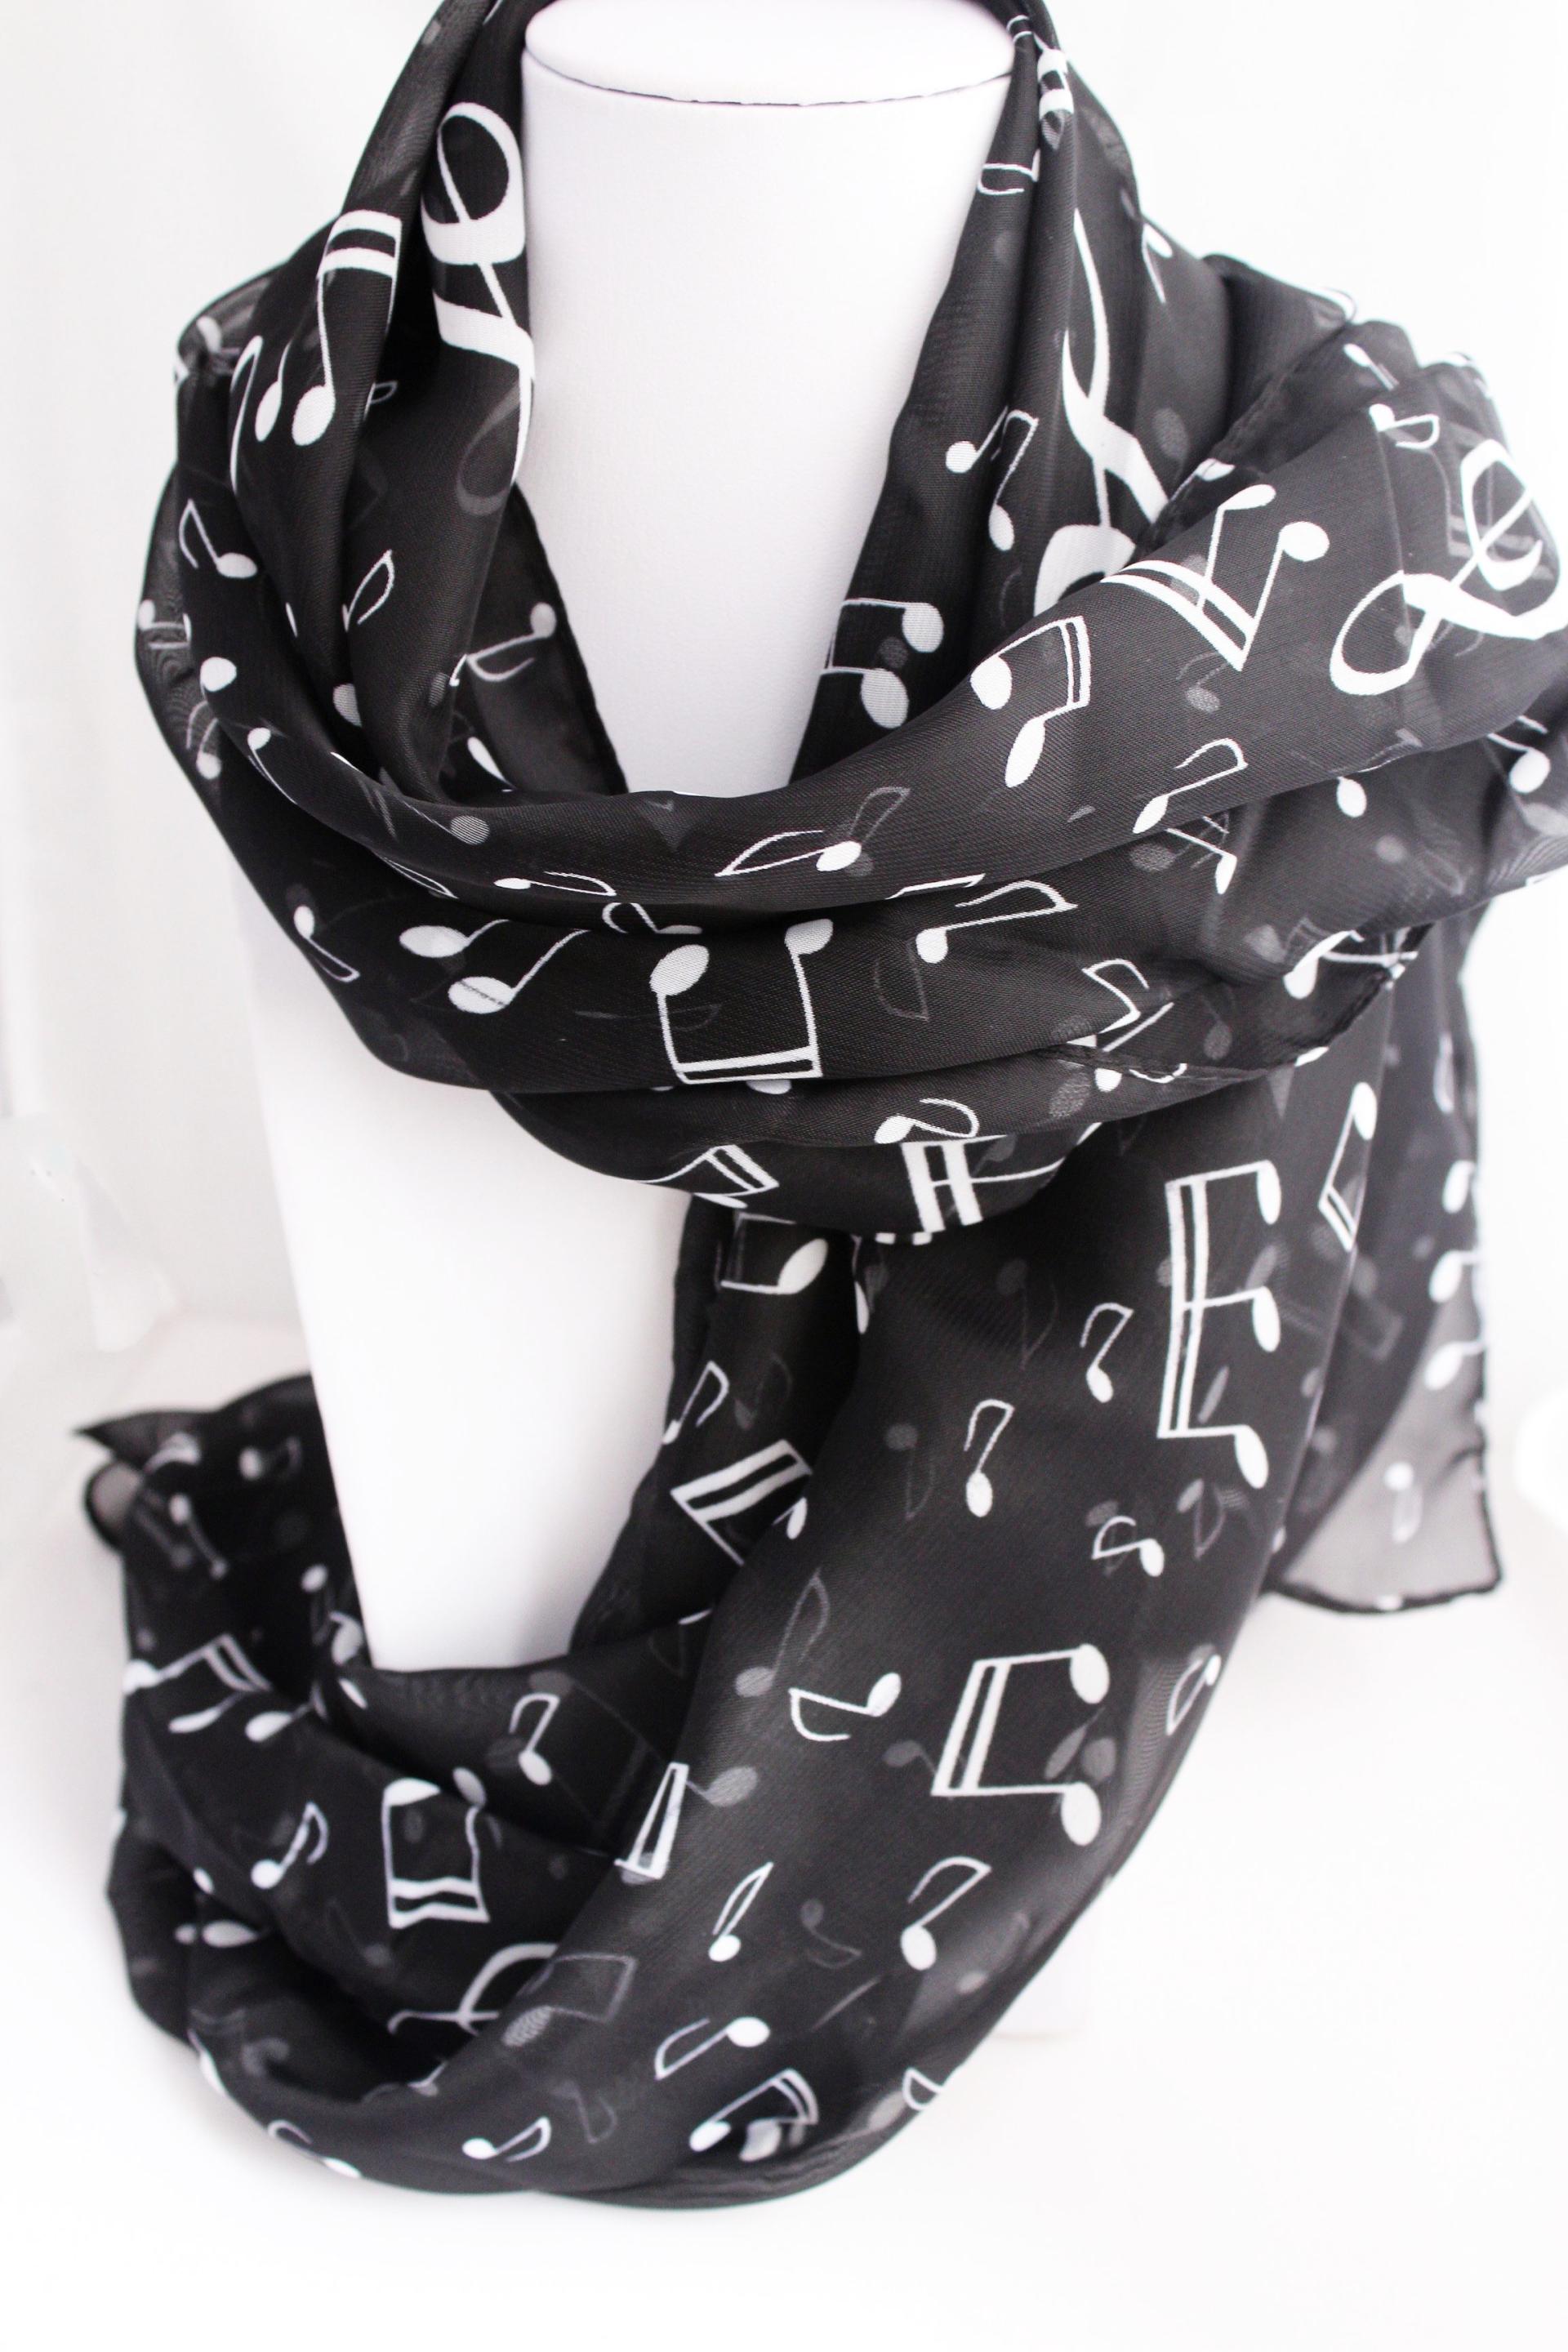 Ladies Musical Note Chiffon Neck Scarf in white